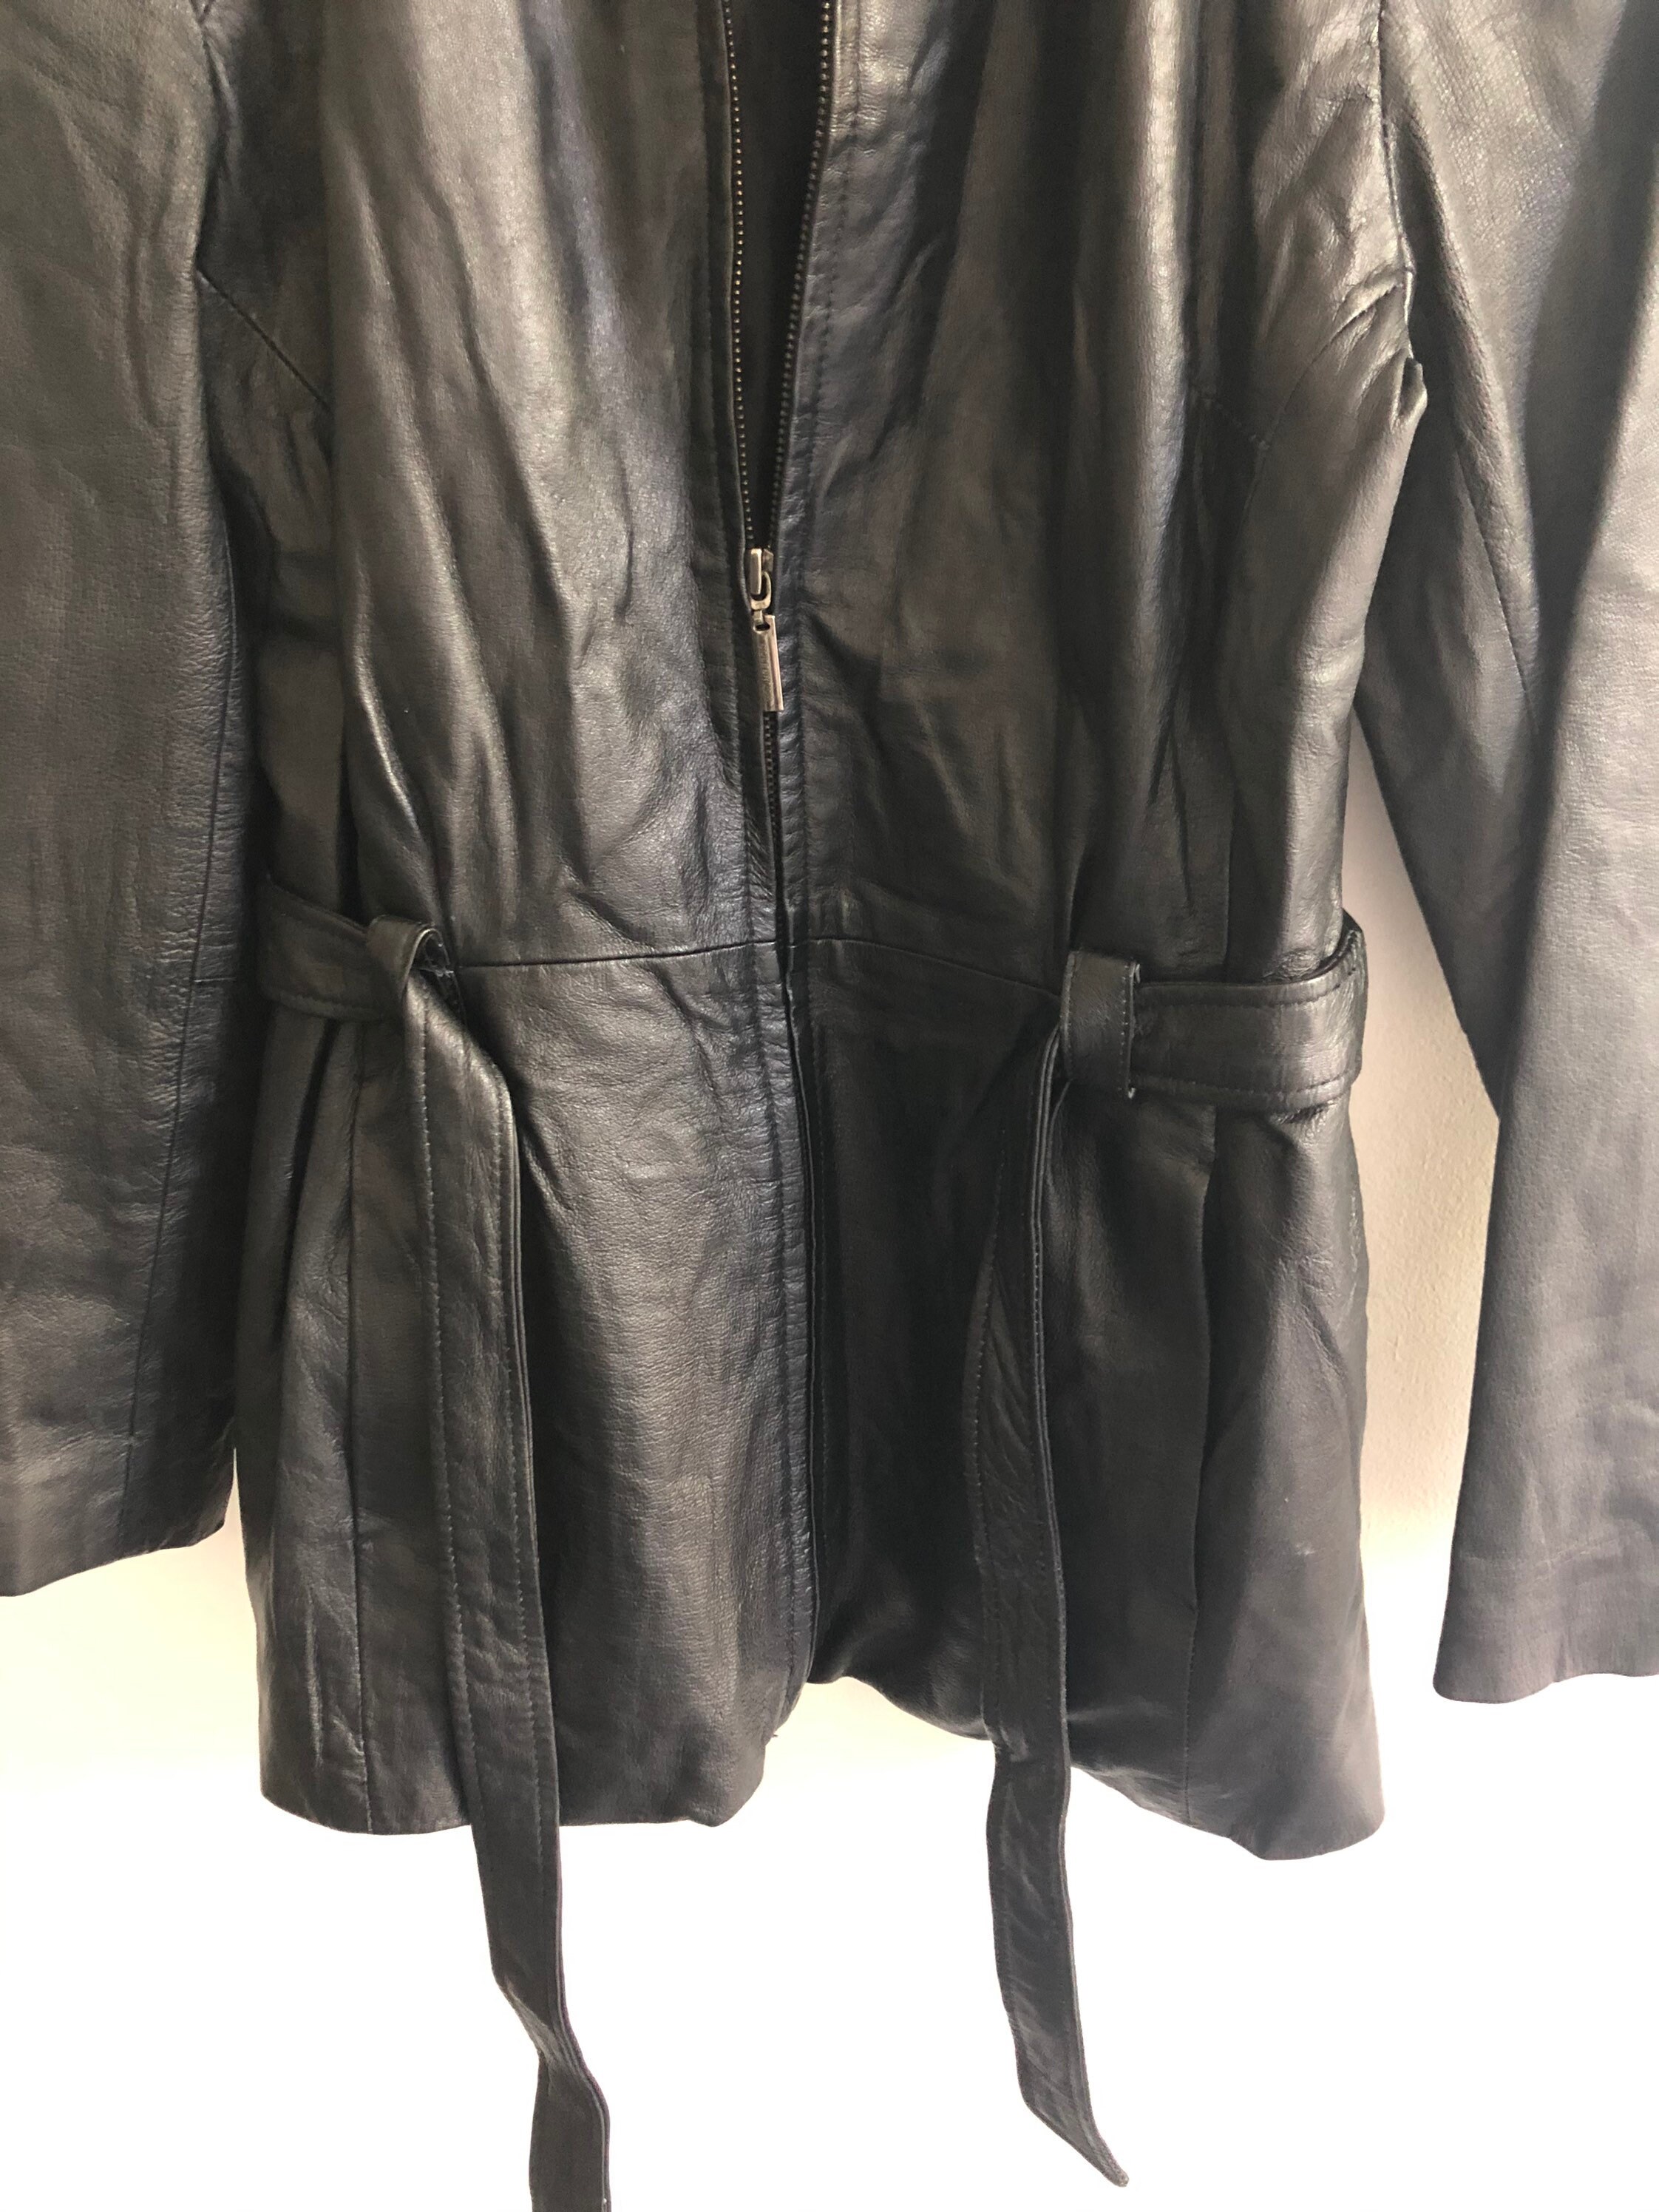 Colebrook and Co Genuine Leather Jacket Trench - Etsy New Zealand